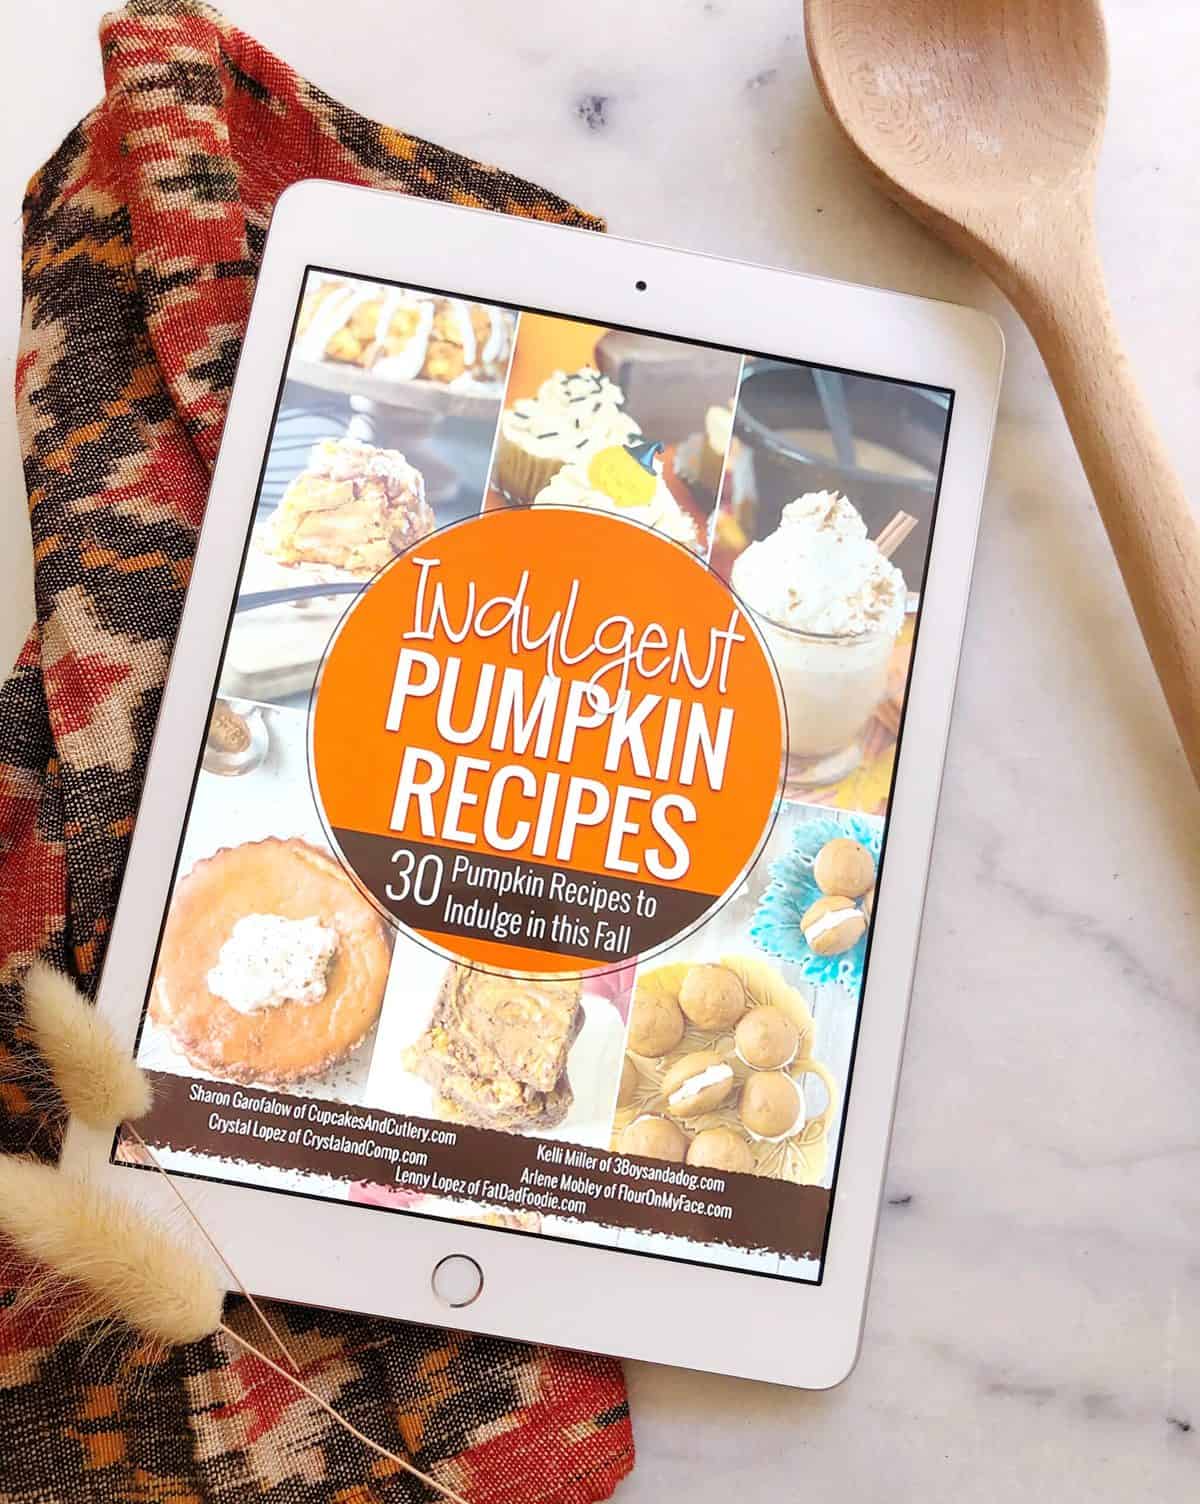 Ipad on a table with a digital pumpkin cookbook on it lying on a cutting board next to a wooden spoon.